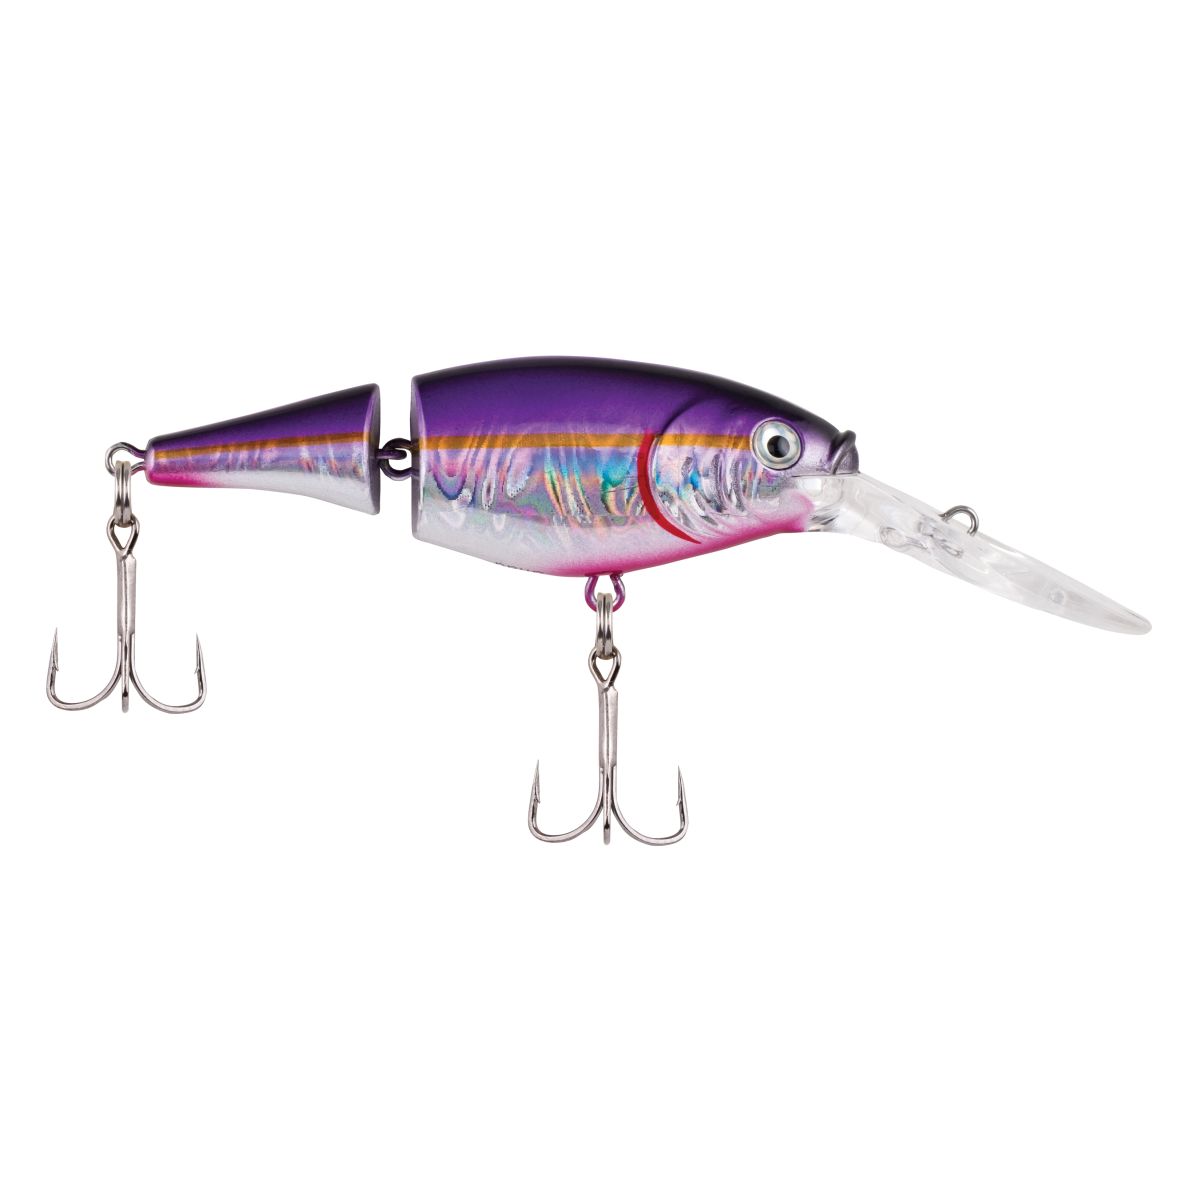 FLICKER SHAD JOINTED SLICK 5CM ALEWIFE